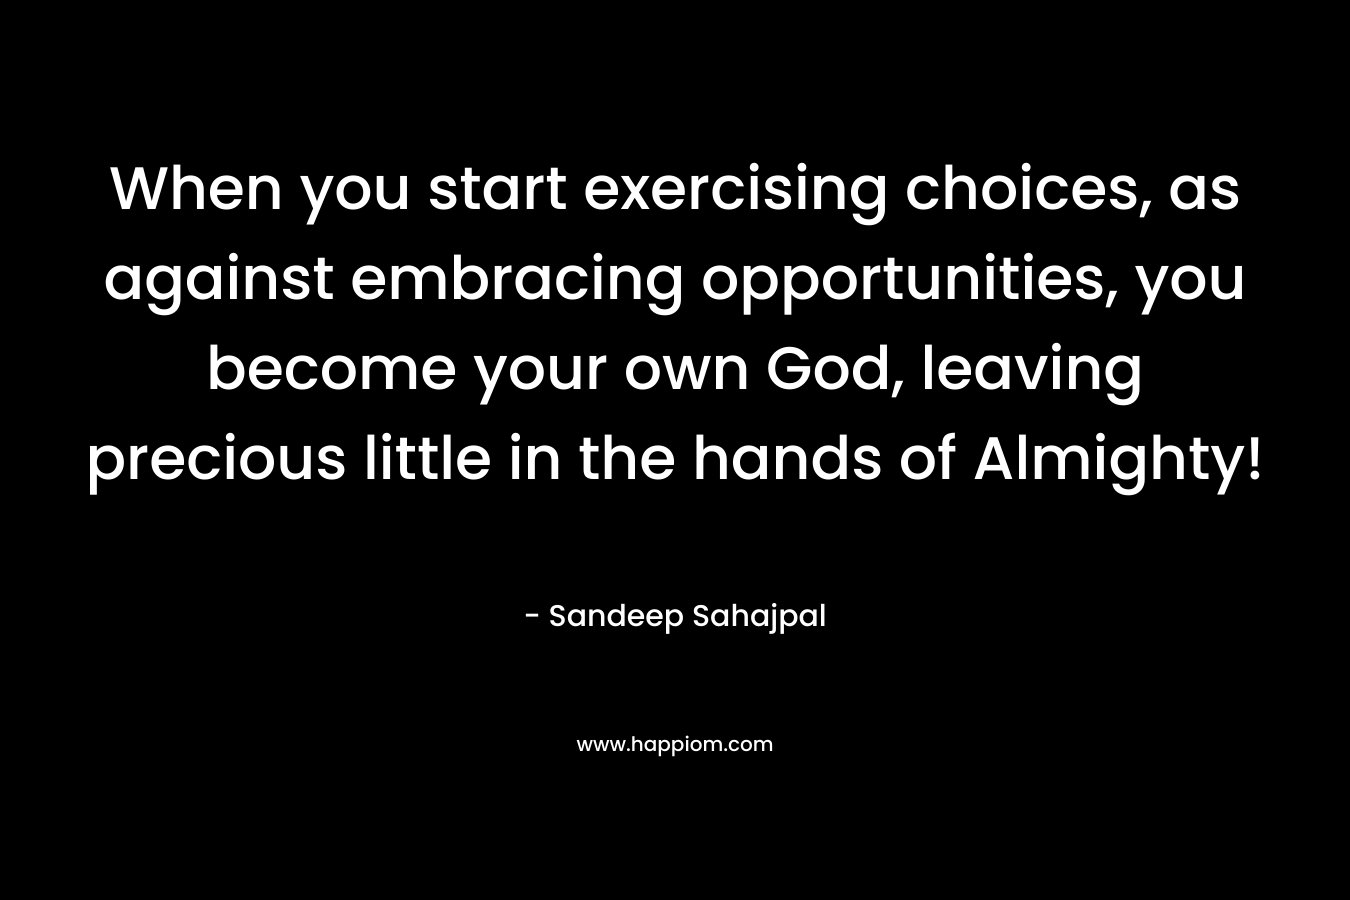 When you start exercising choices, as against embracing opportunities, you become your own God, leaving precious little in the hands of Almighty! – Sandeep Sahajpal